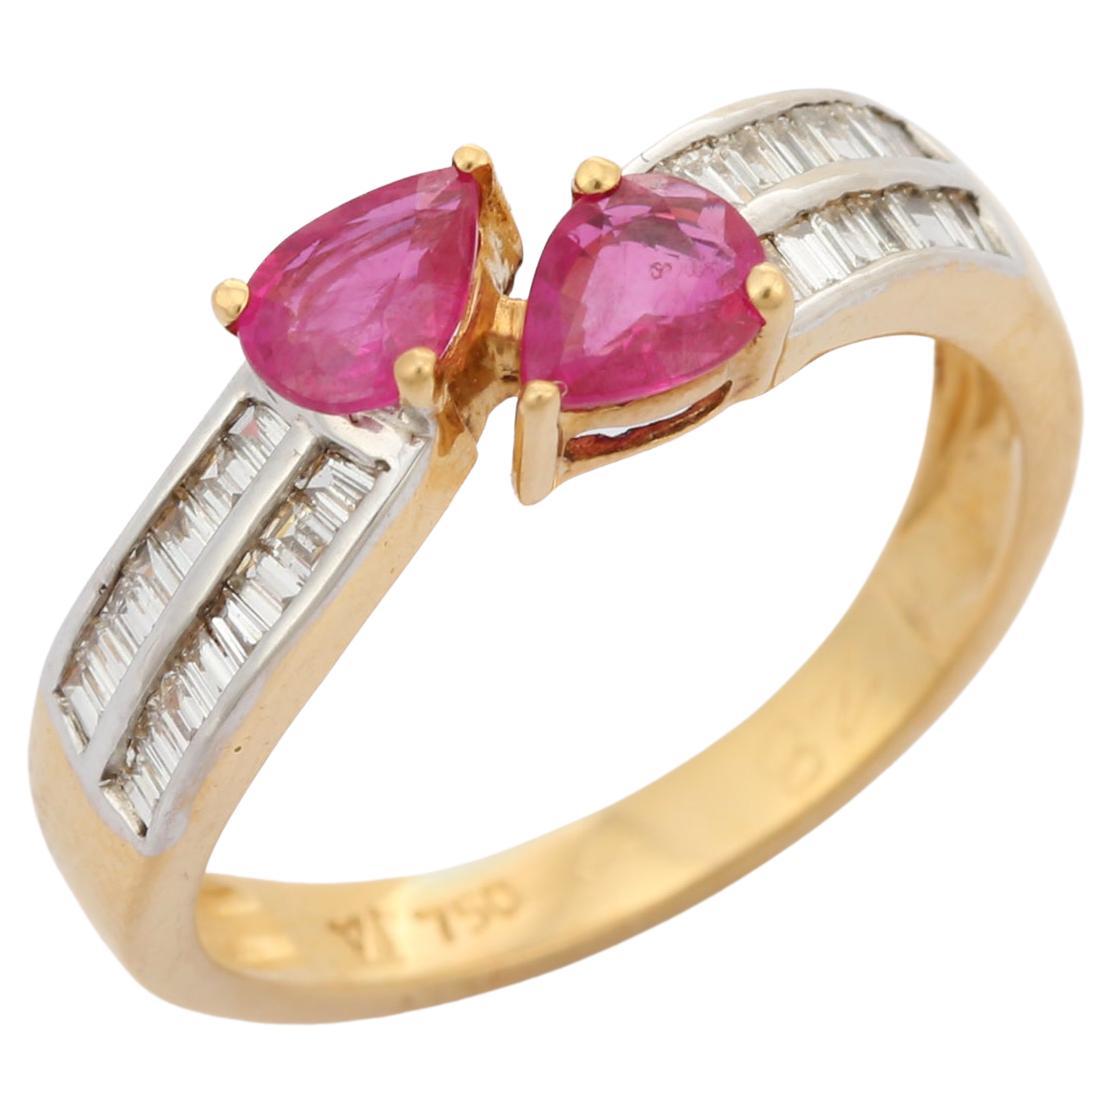 For Sale:  Handcrafted 18K Solid Yellow Gold Pear Cut Ruby and Diamond Wrap Around Ring